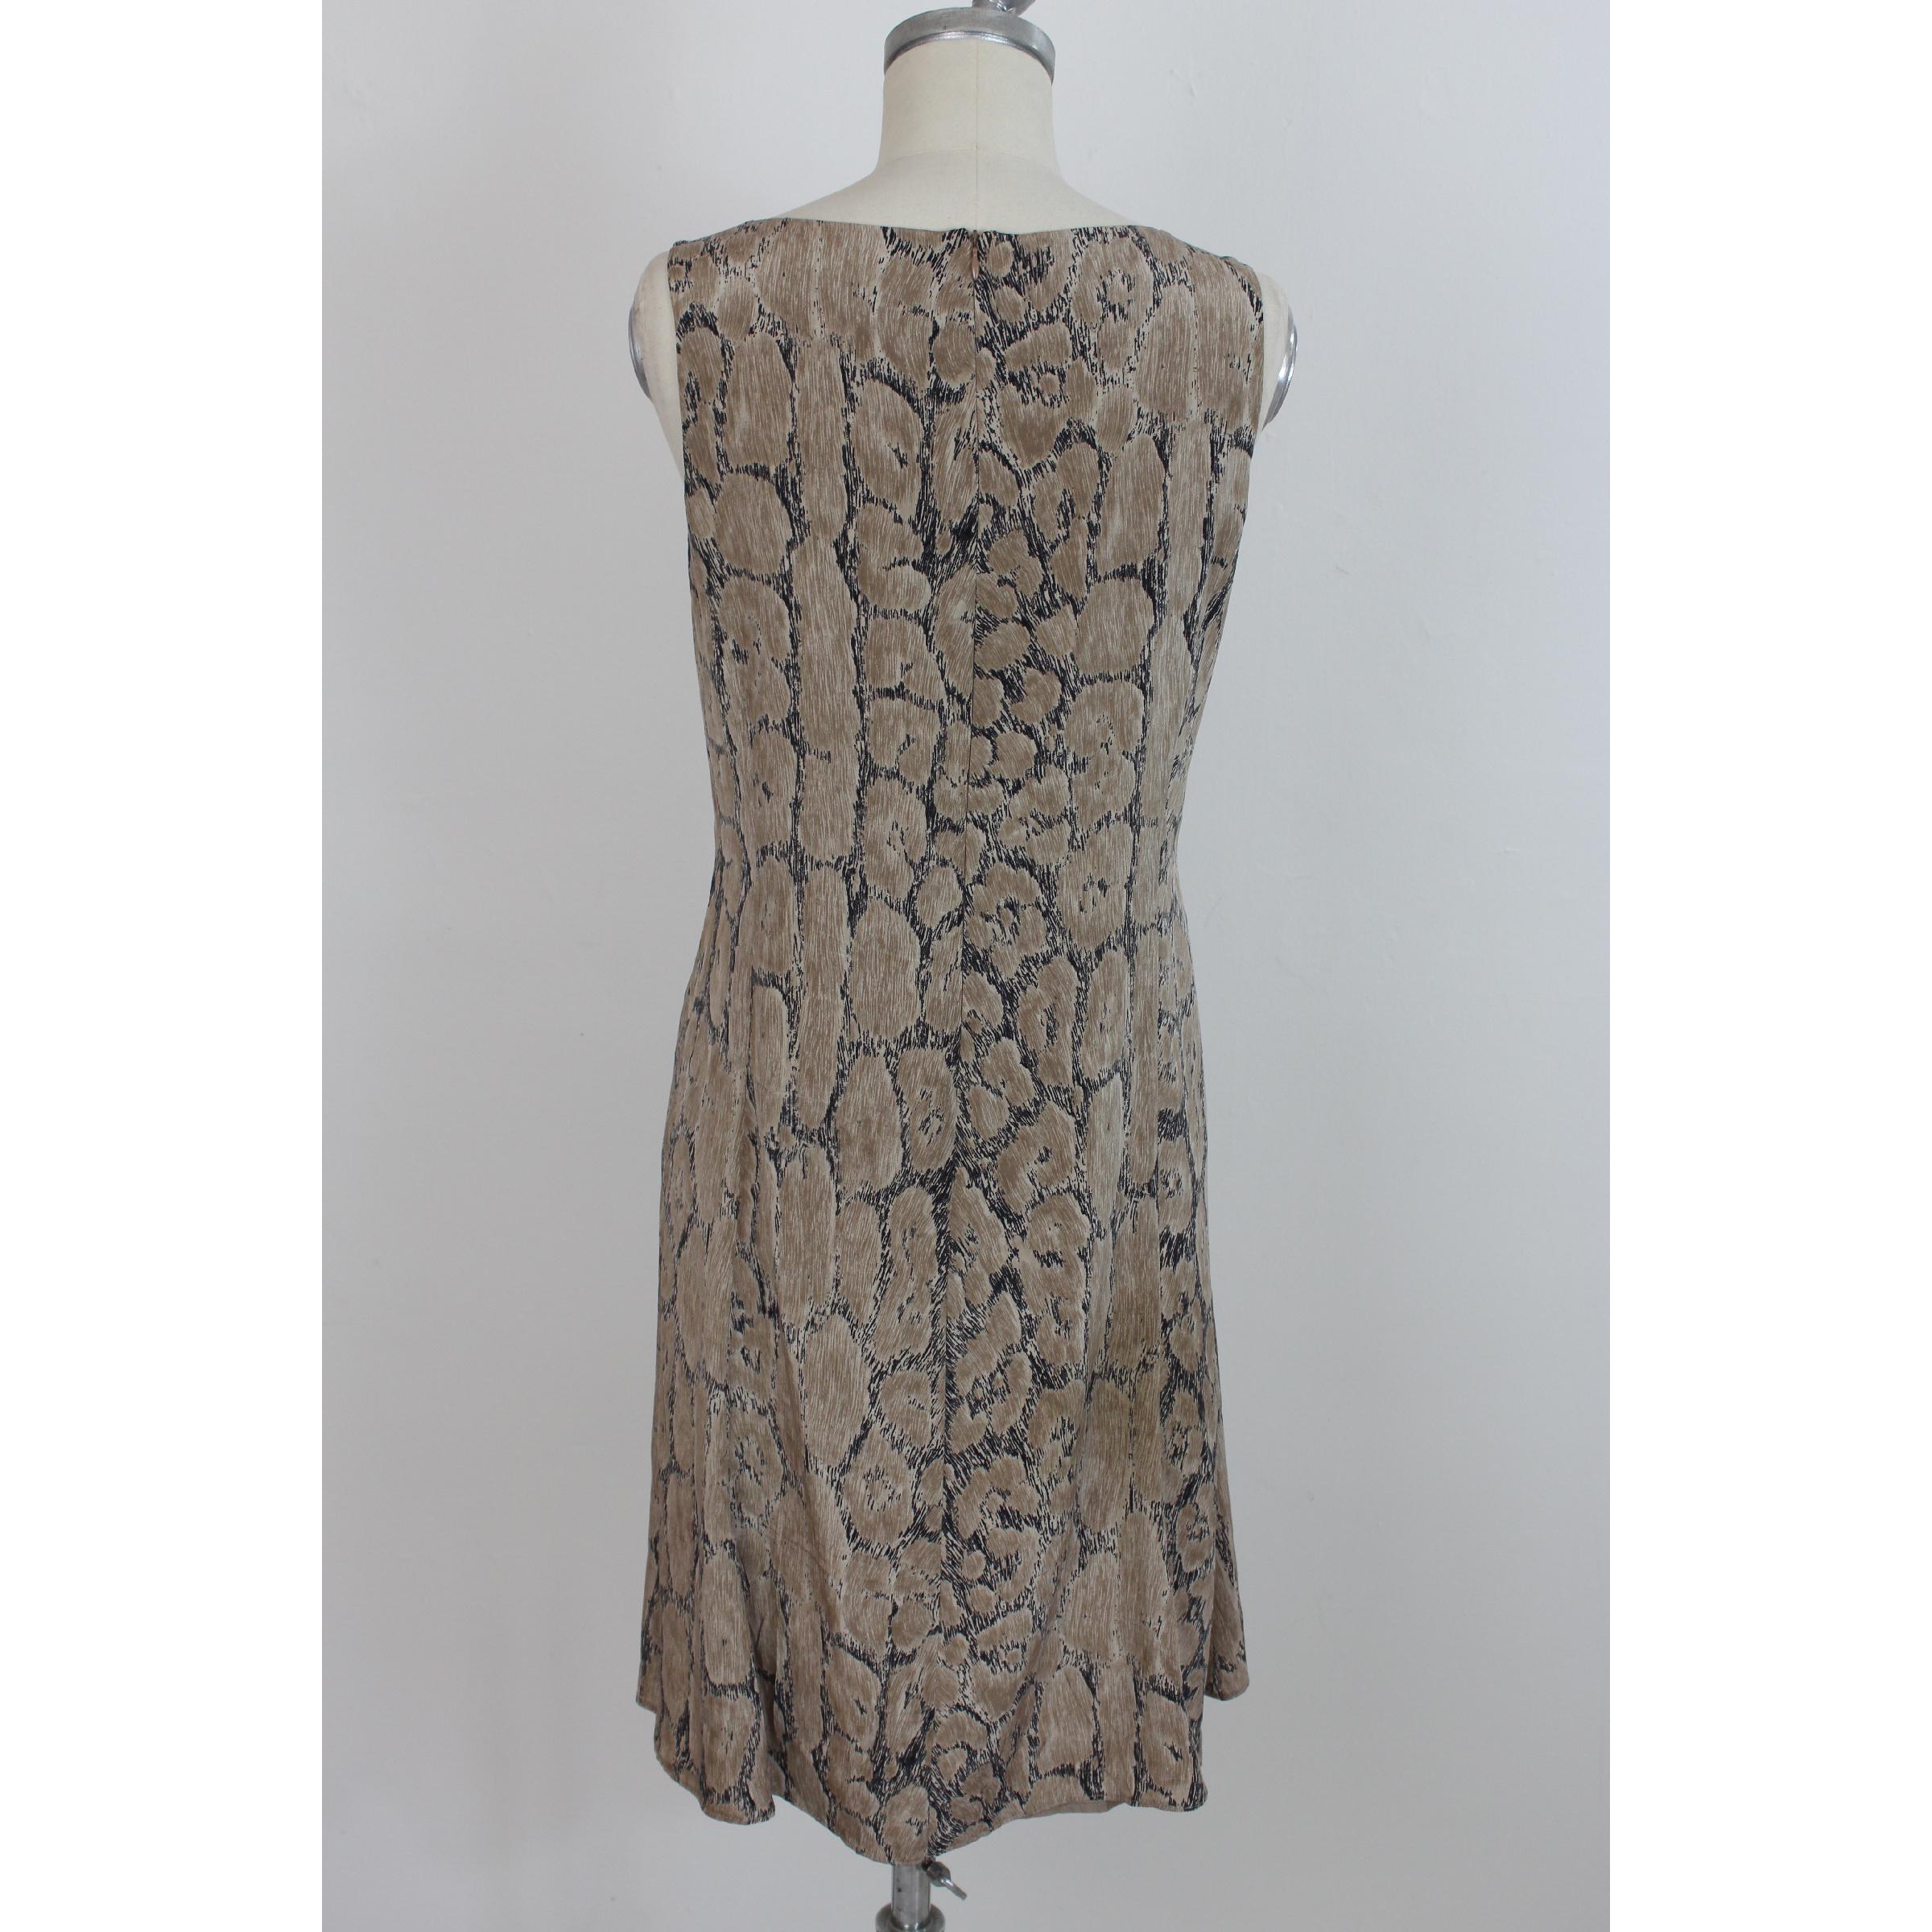 Krizia long dress for women vintage, beige and black with abstract designs, 100% silk. Sleeveless. Made in Italy. Excellent vintage conditions.

Size: 44 It 10 Us 12 Uk

Shoulder: 44 cm
Bust / Chest: 50 cm
Length: 100 cm